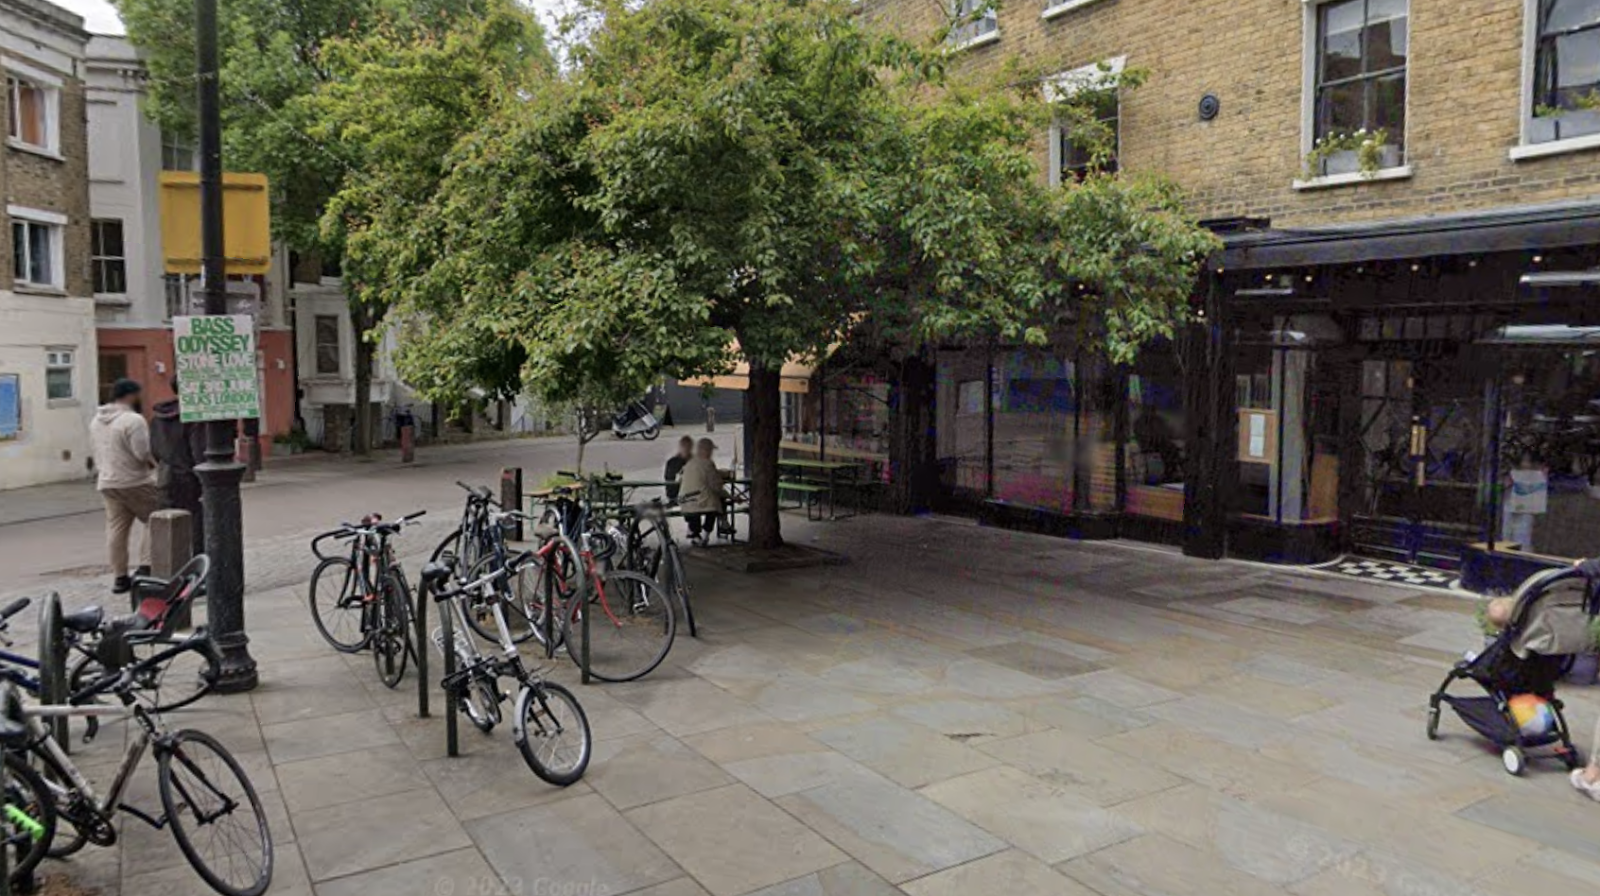 Google maps photograph of the street outside Herne Hill station leading onto Railton Road